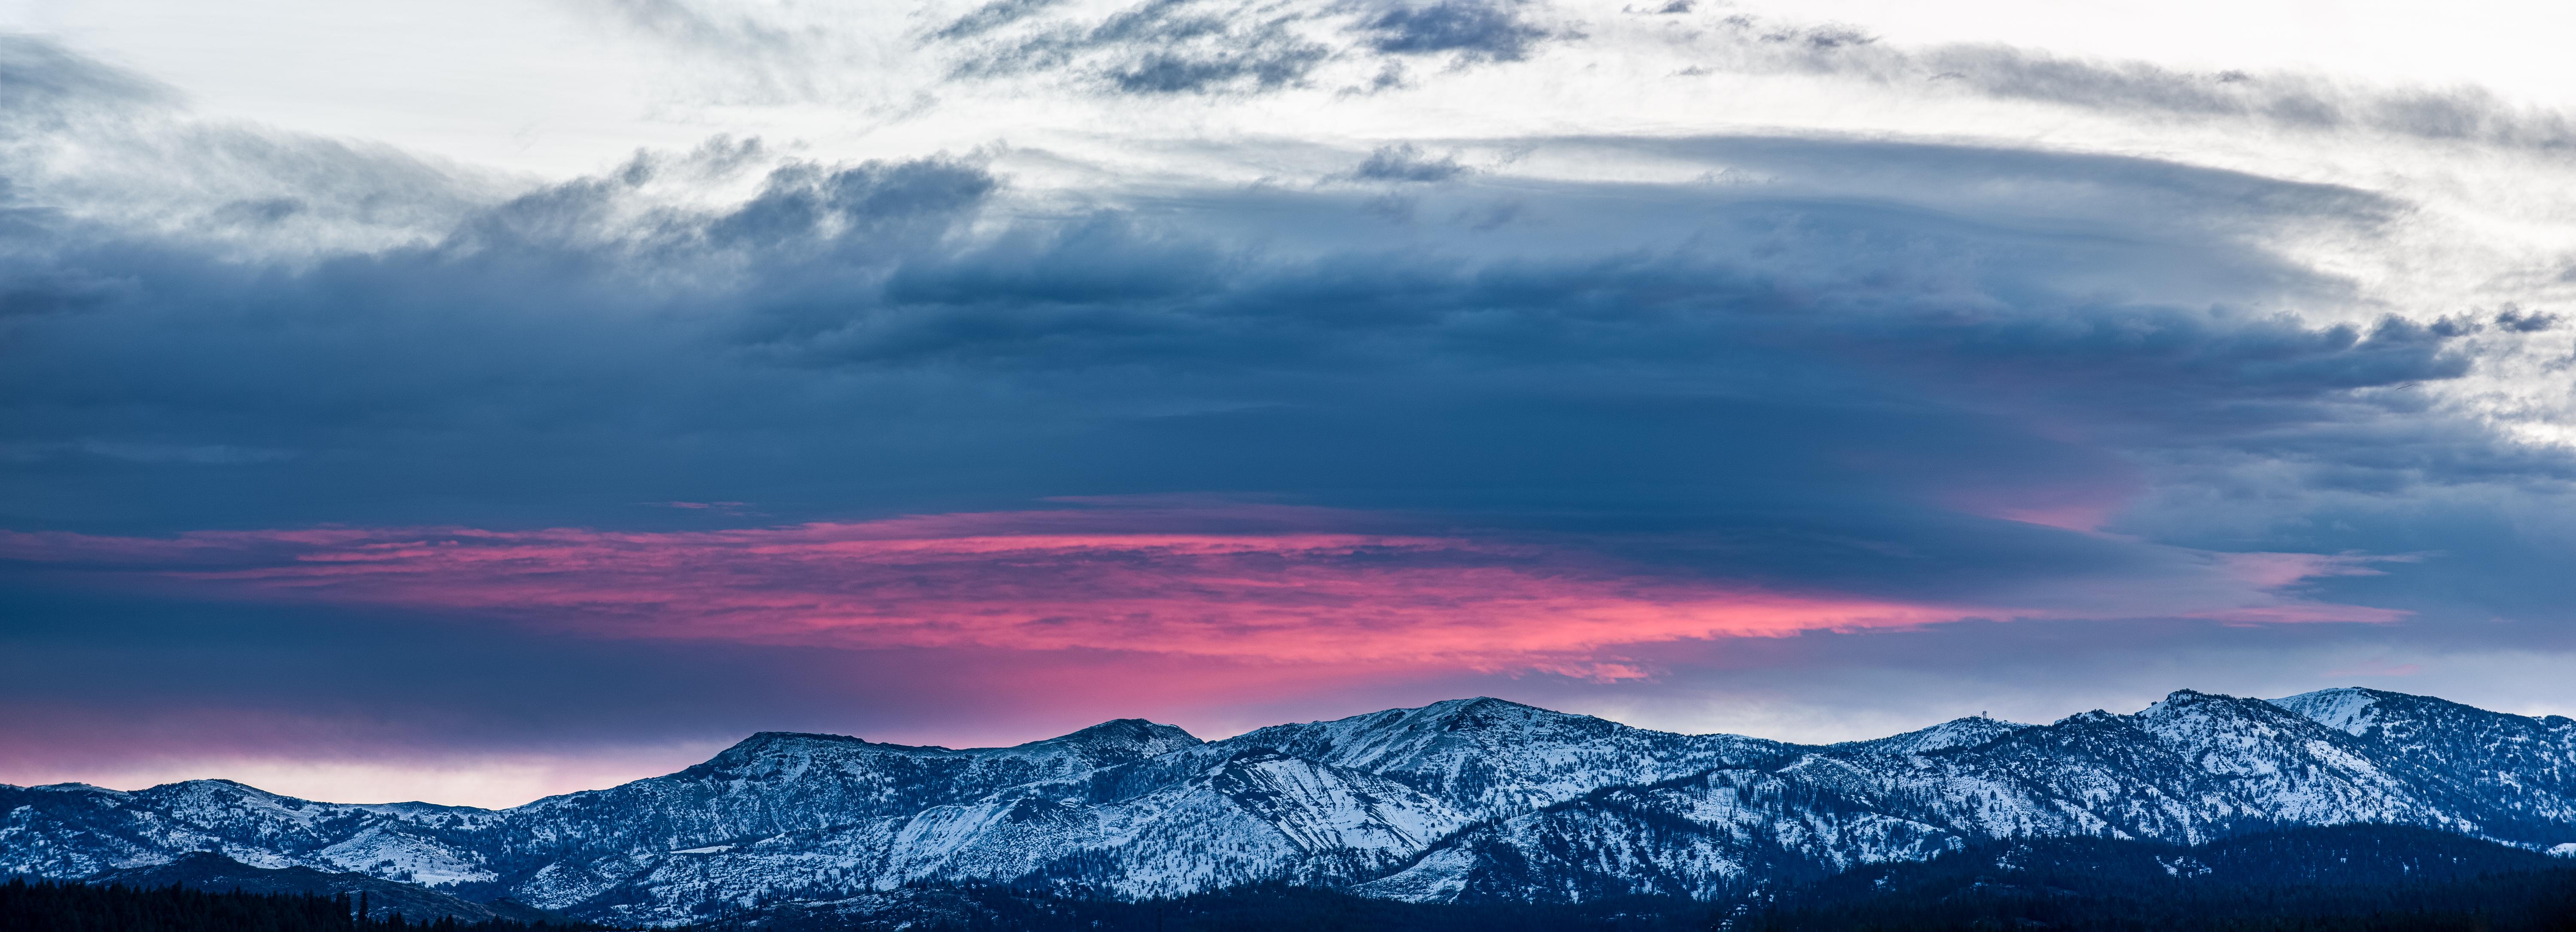 Clouds Sunset Winter Mountains Forest Nevada USA North America Panorama Landscape Nature 6000x2171